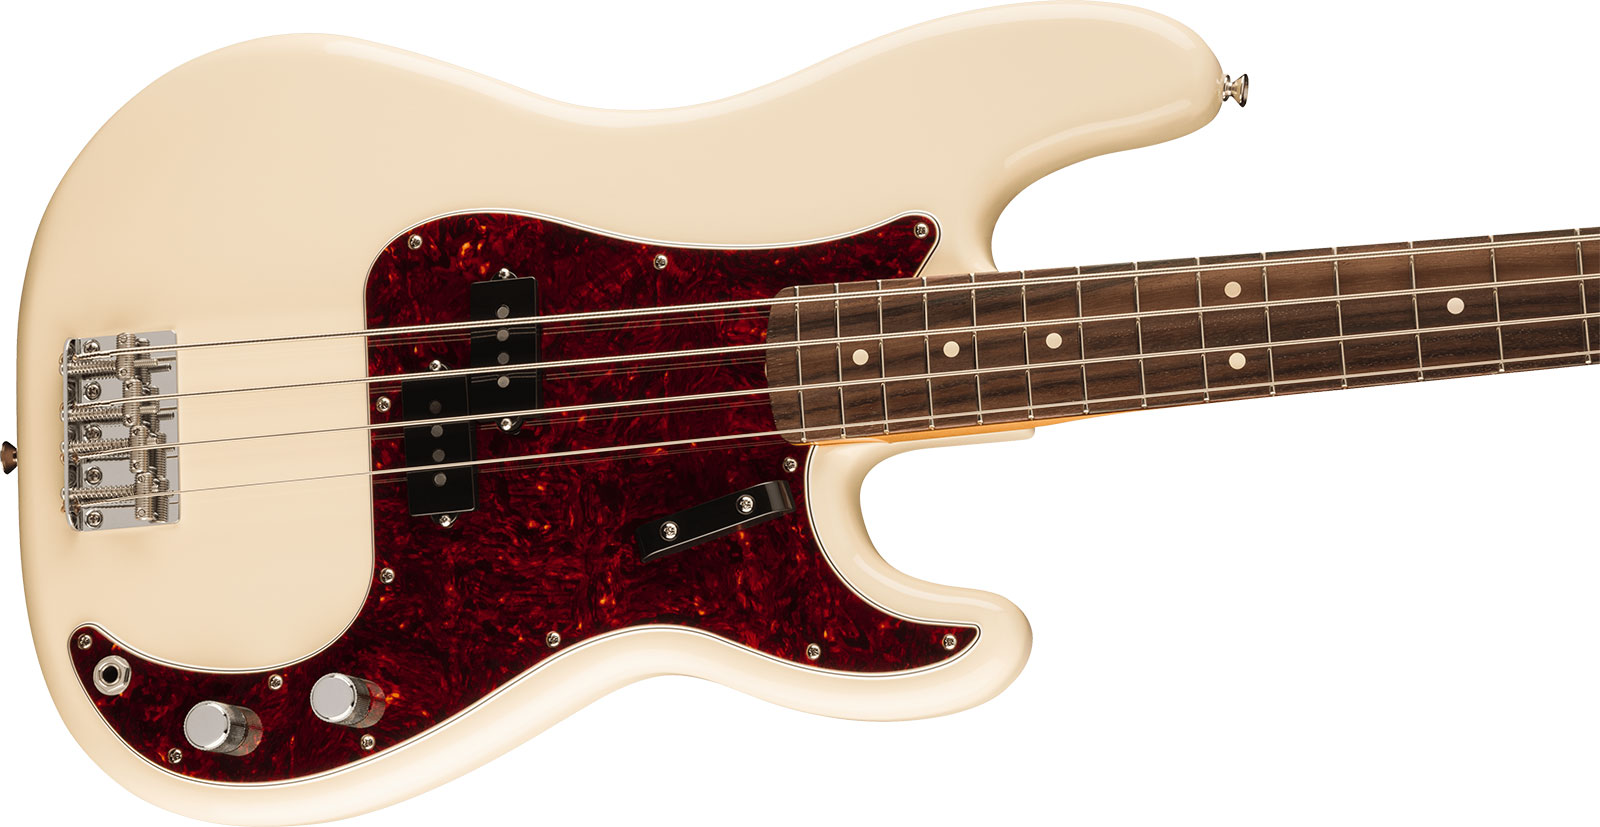 Fender Precision Bass 60s Vintera Ii Mex Rw - Olympic White - Basse Électrique Solid Body - Variation 2